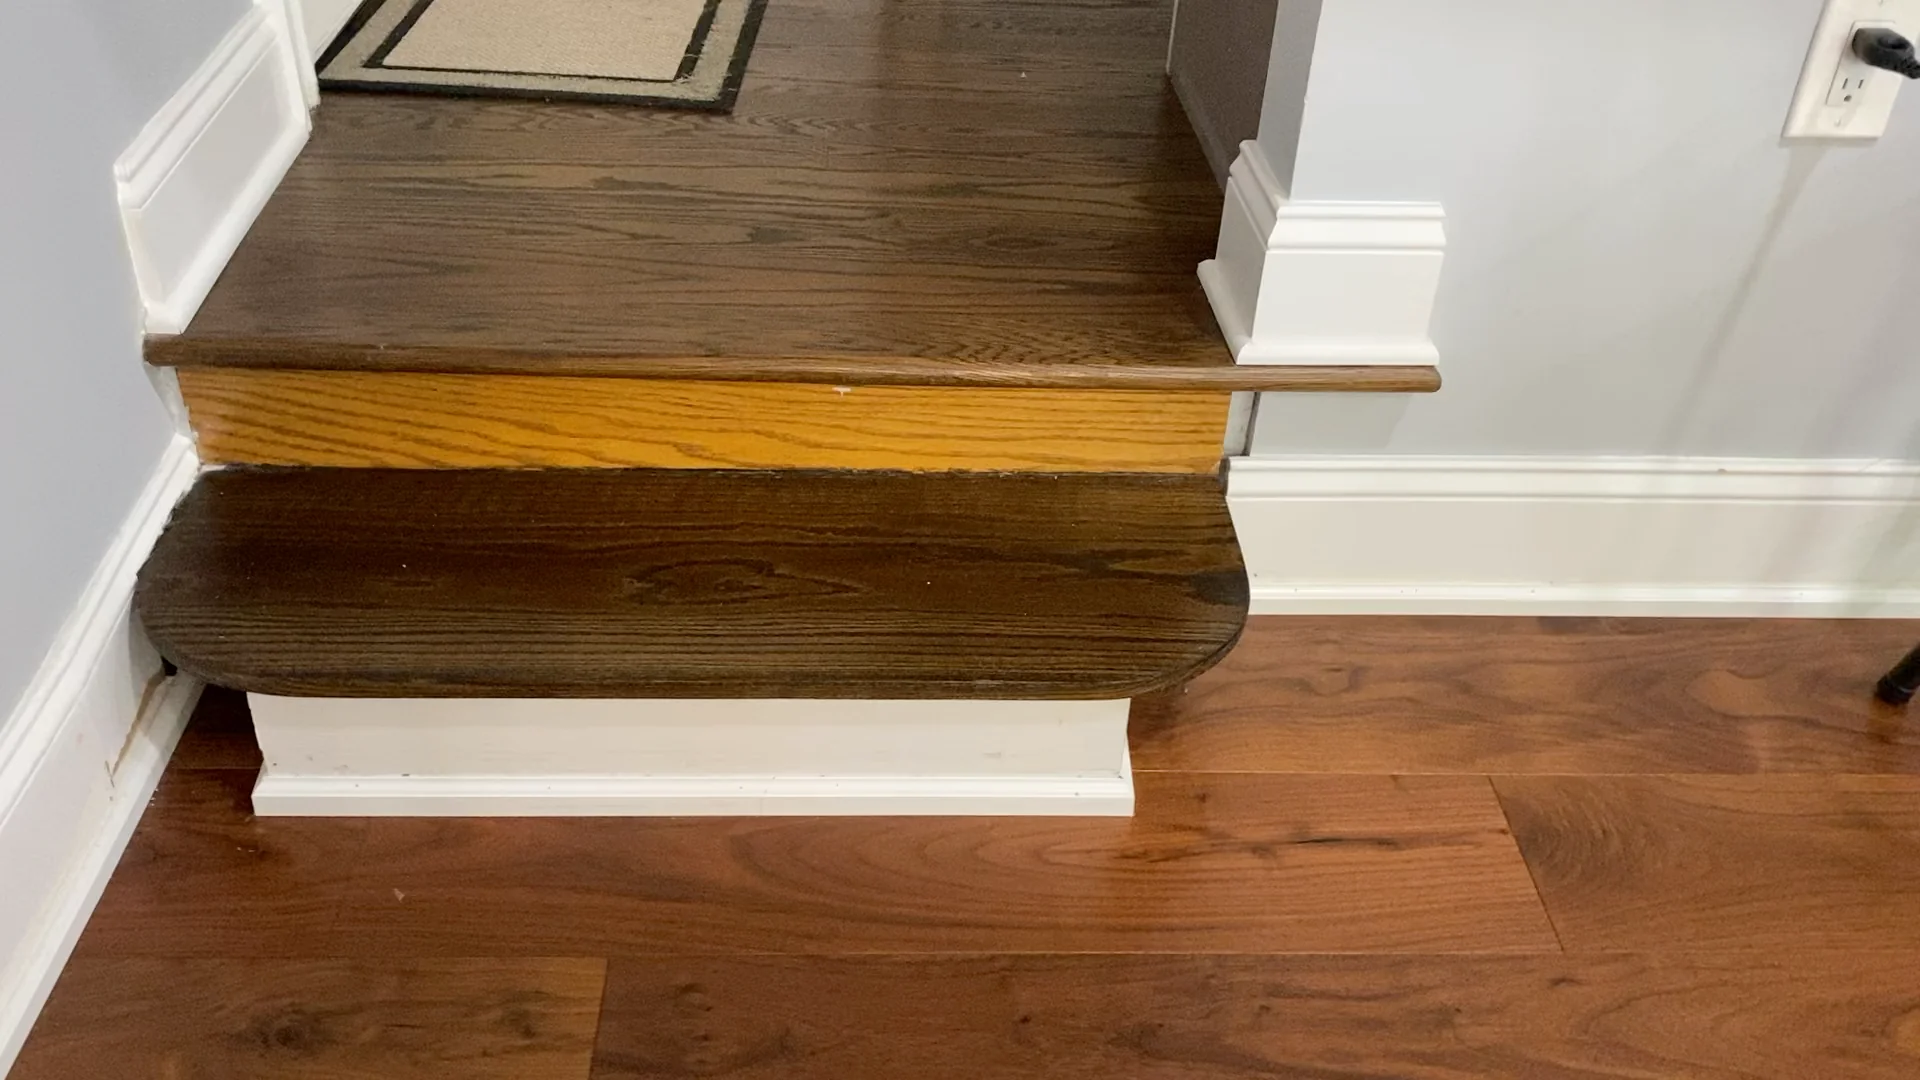 Close-up view of a stair step intersection with contrasting stained wood against the newly refinished hardwood floor, depicting the detail and care taken in a project. The image reflects the expert refinishing work that enhances the wood's natural texture and color in a residential setting.